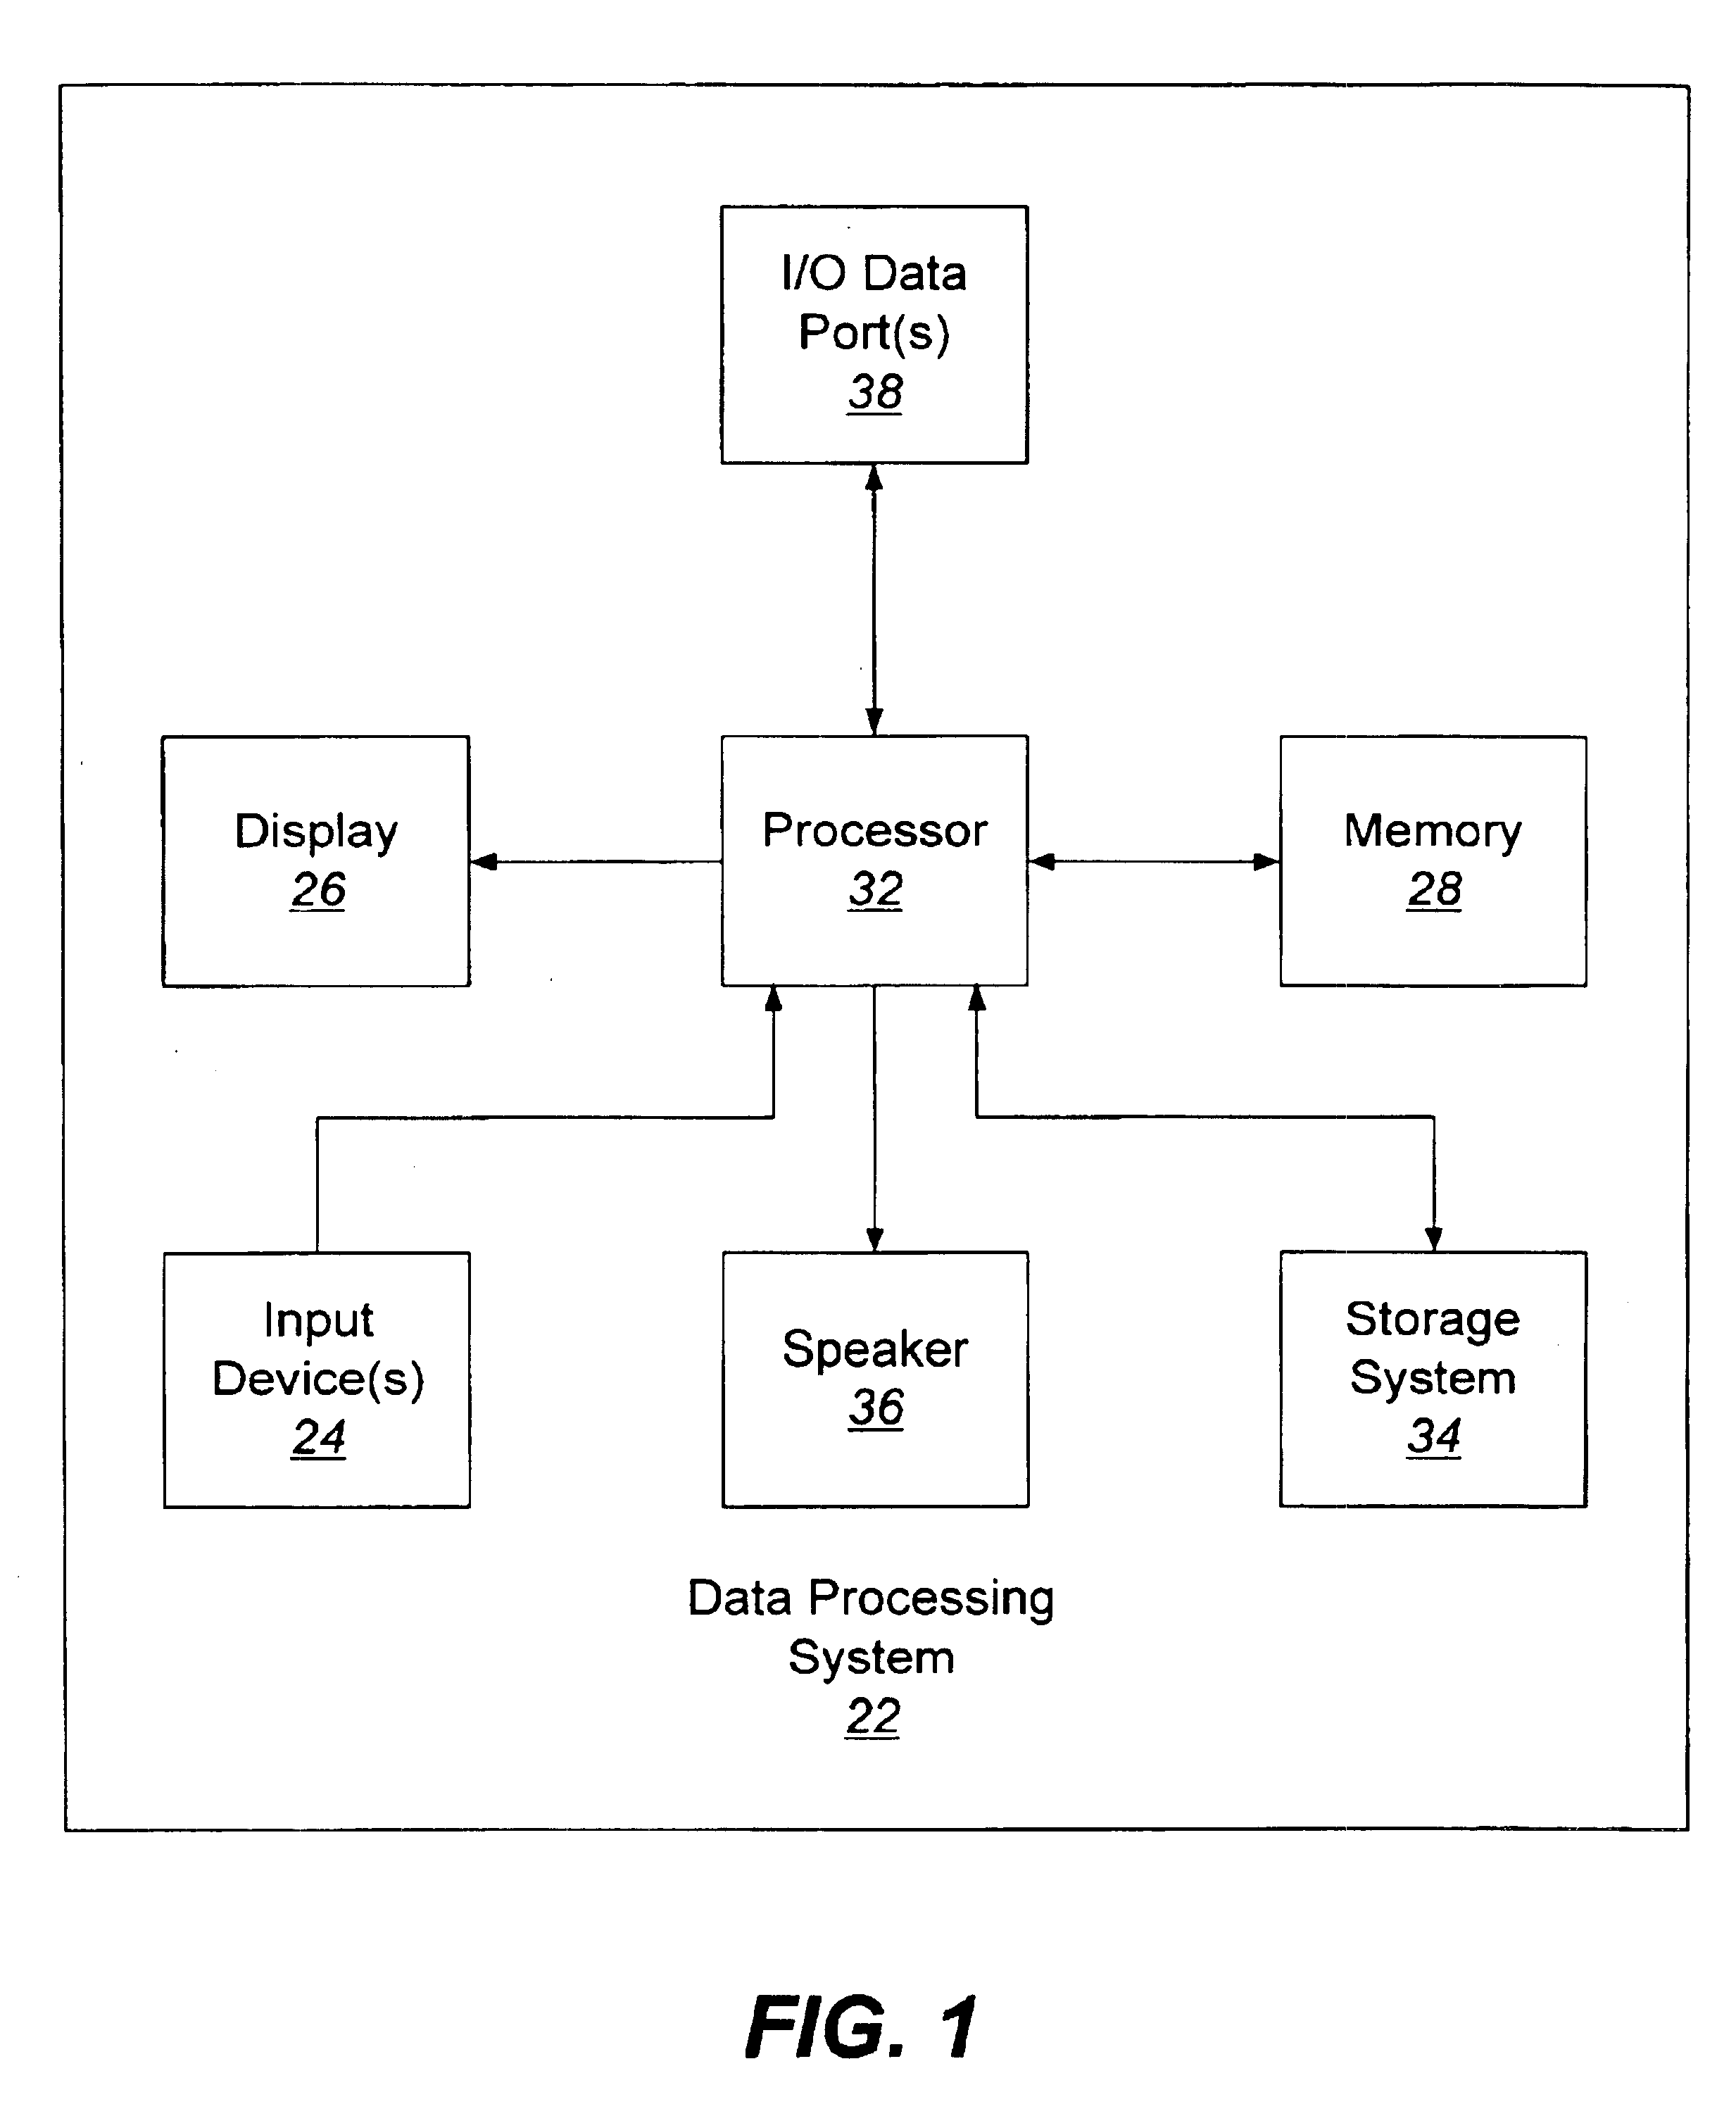 Methods, systems, and computer program products for compressing a computer program based on a compression criterion and executing the compressed program